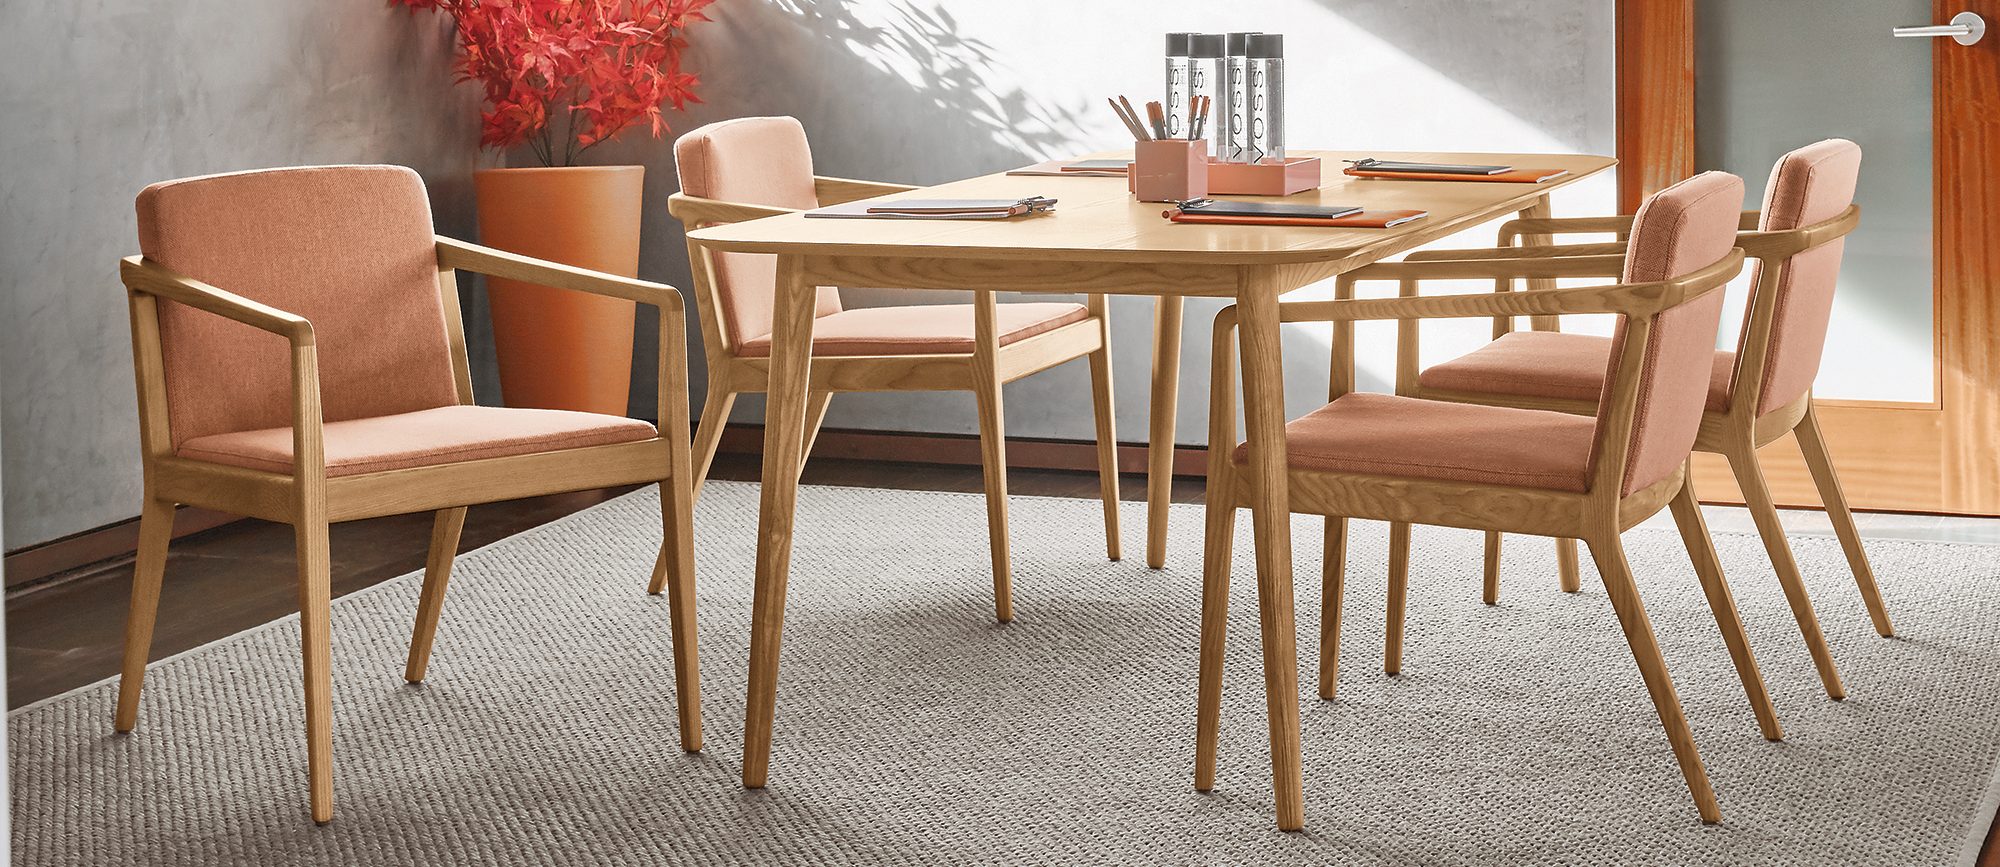 Kindred Guest Chairs with Hado Meeting Table